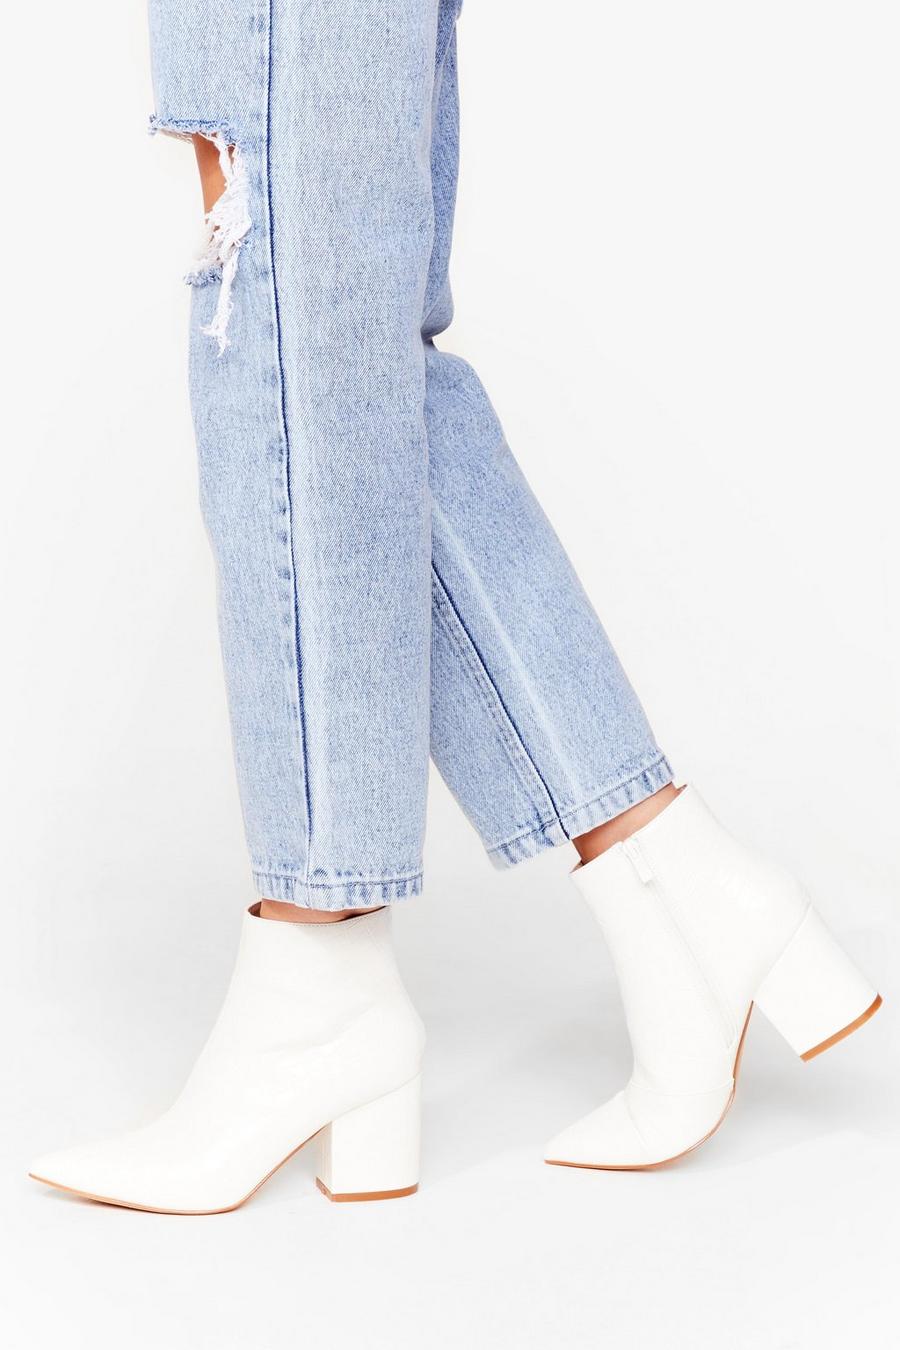 White Here Ankle Boots